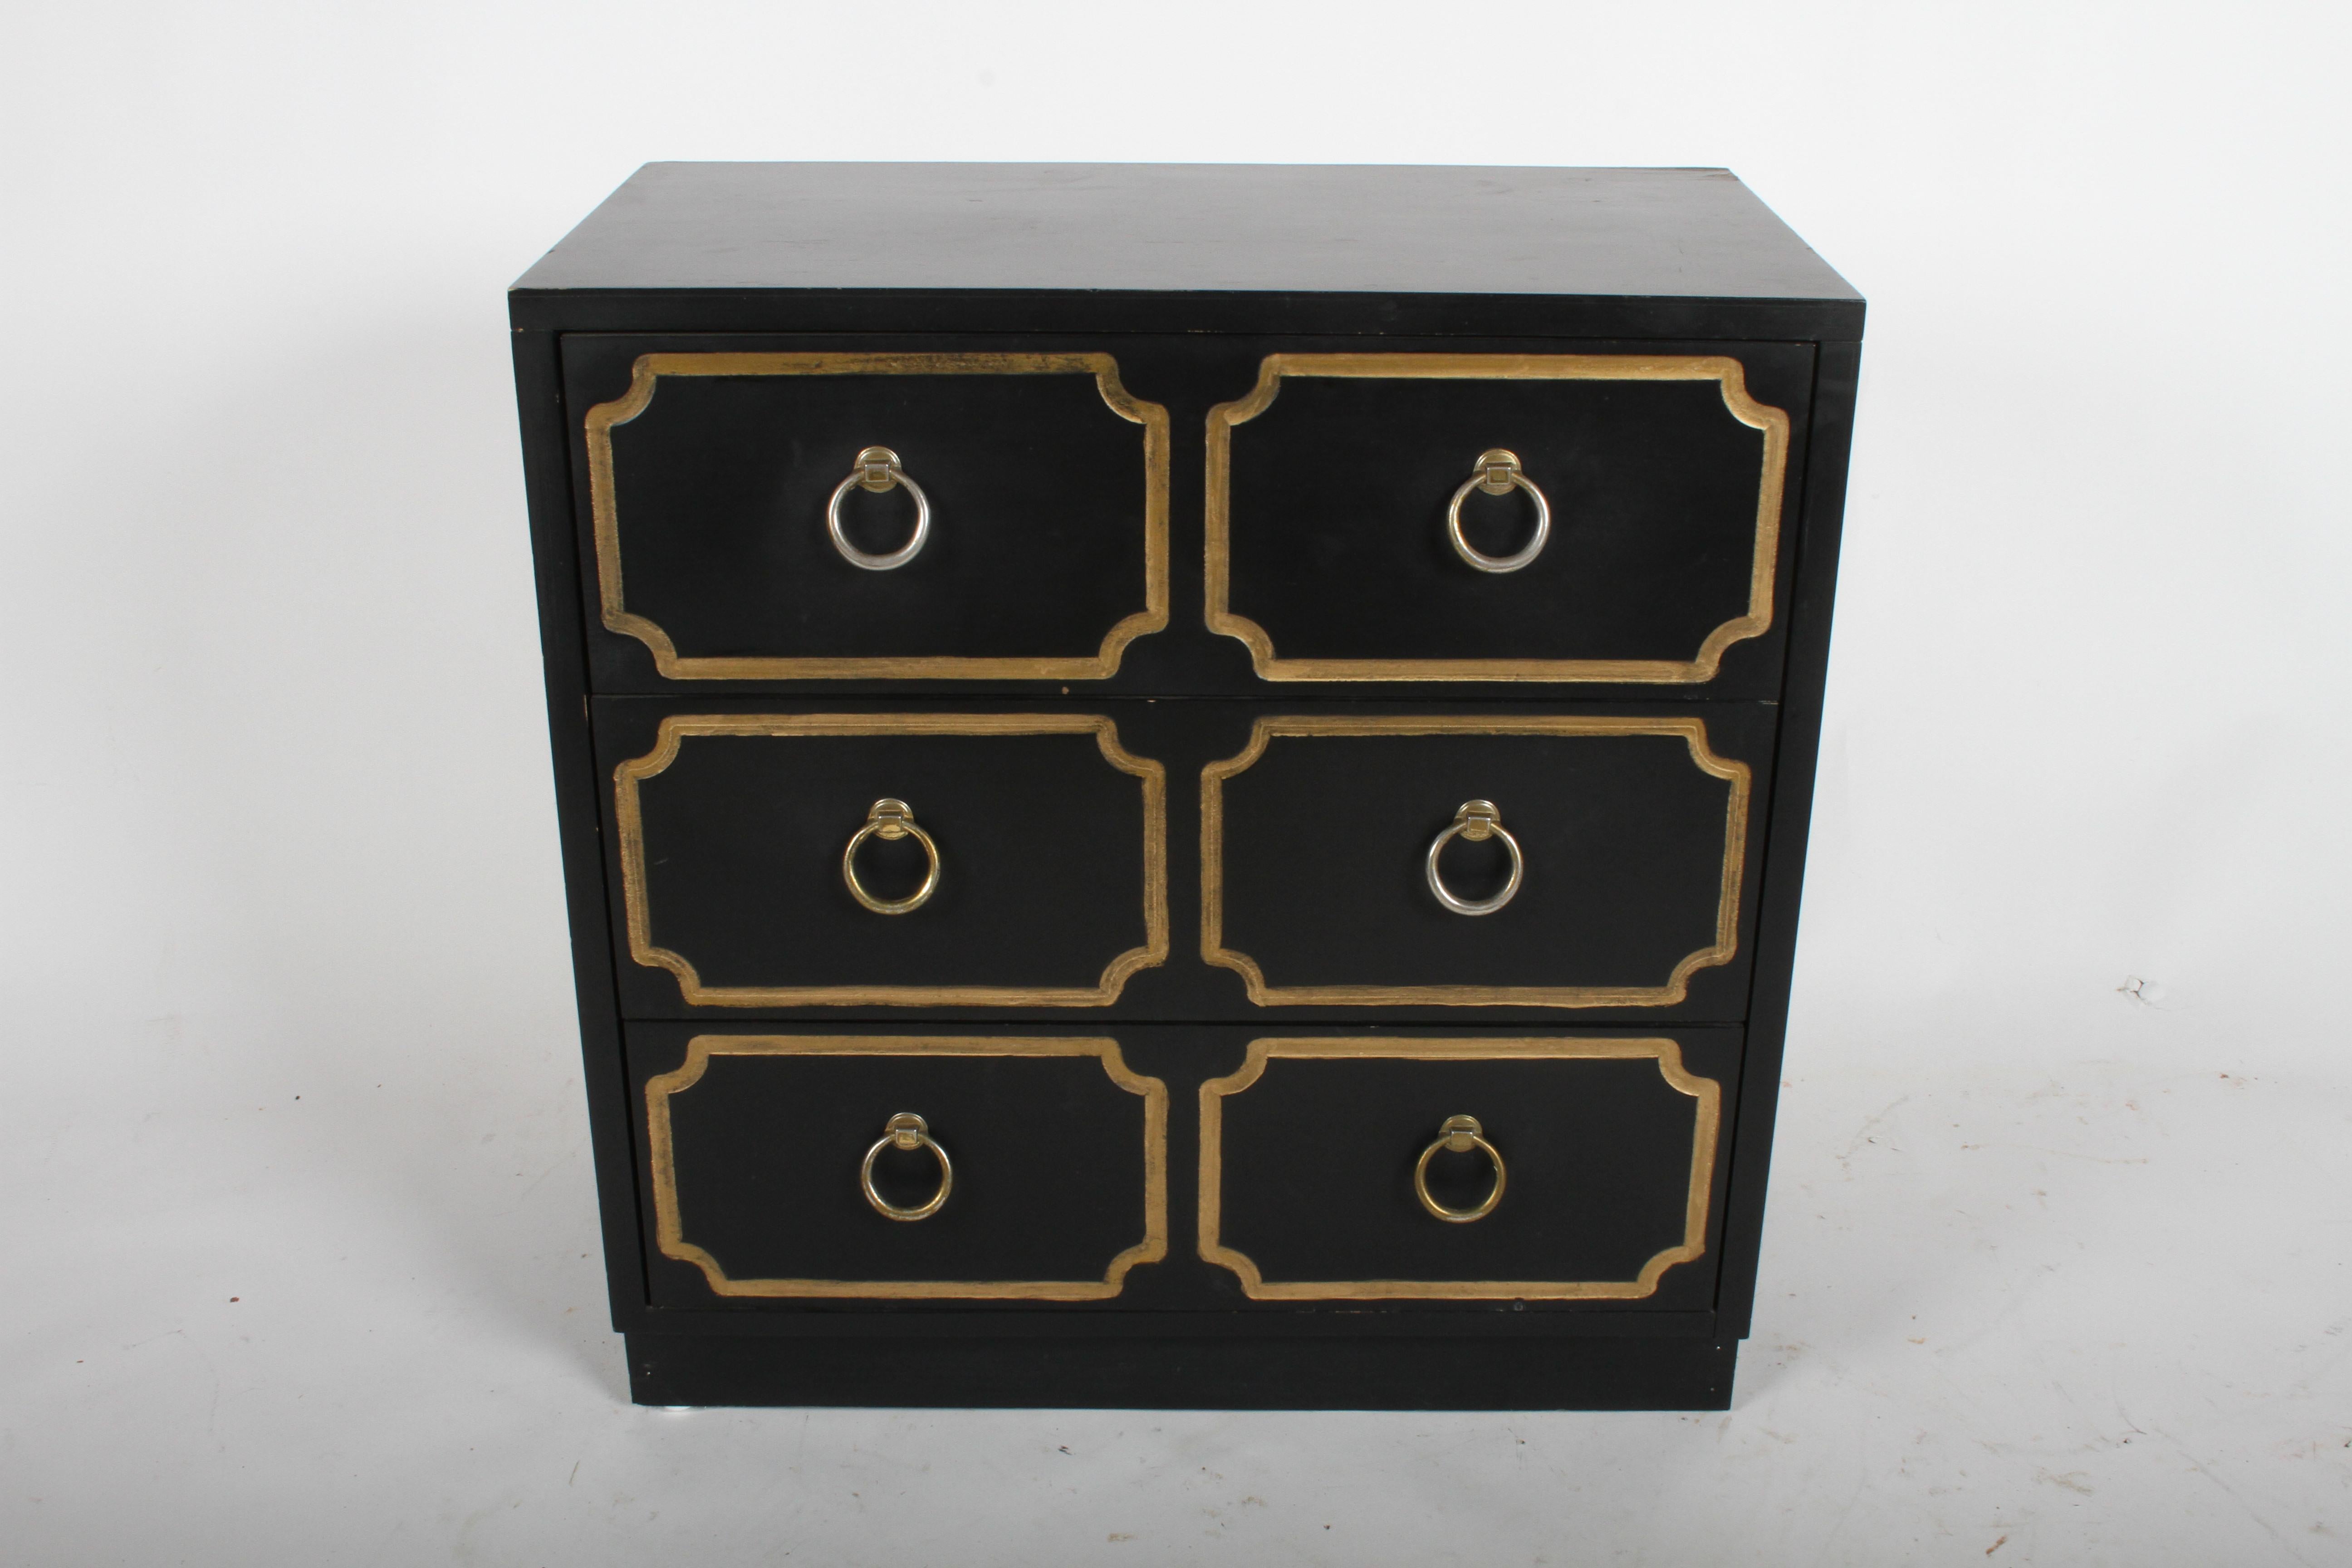 Hollywood Regency Dorothy Draper style chest of drawers or nightstand in black and gold, similar to the 